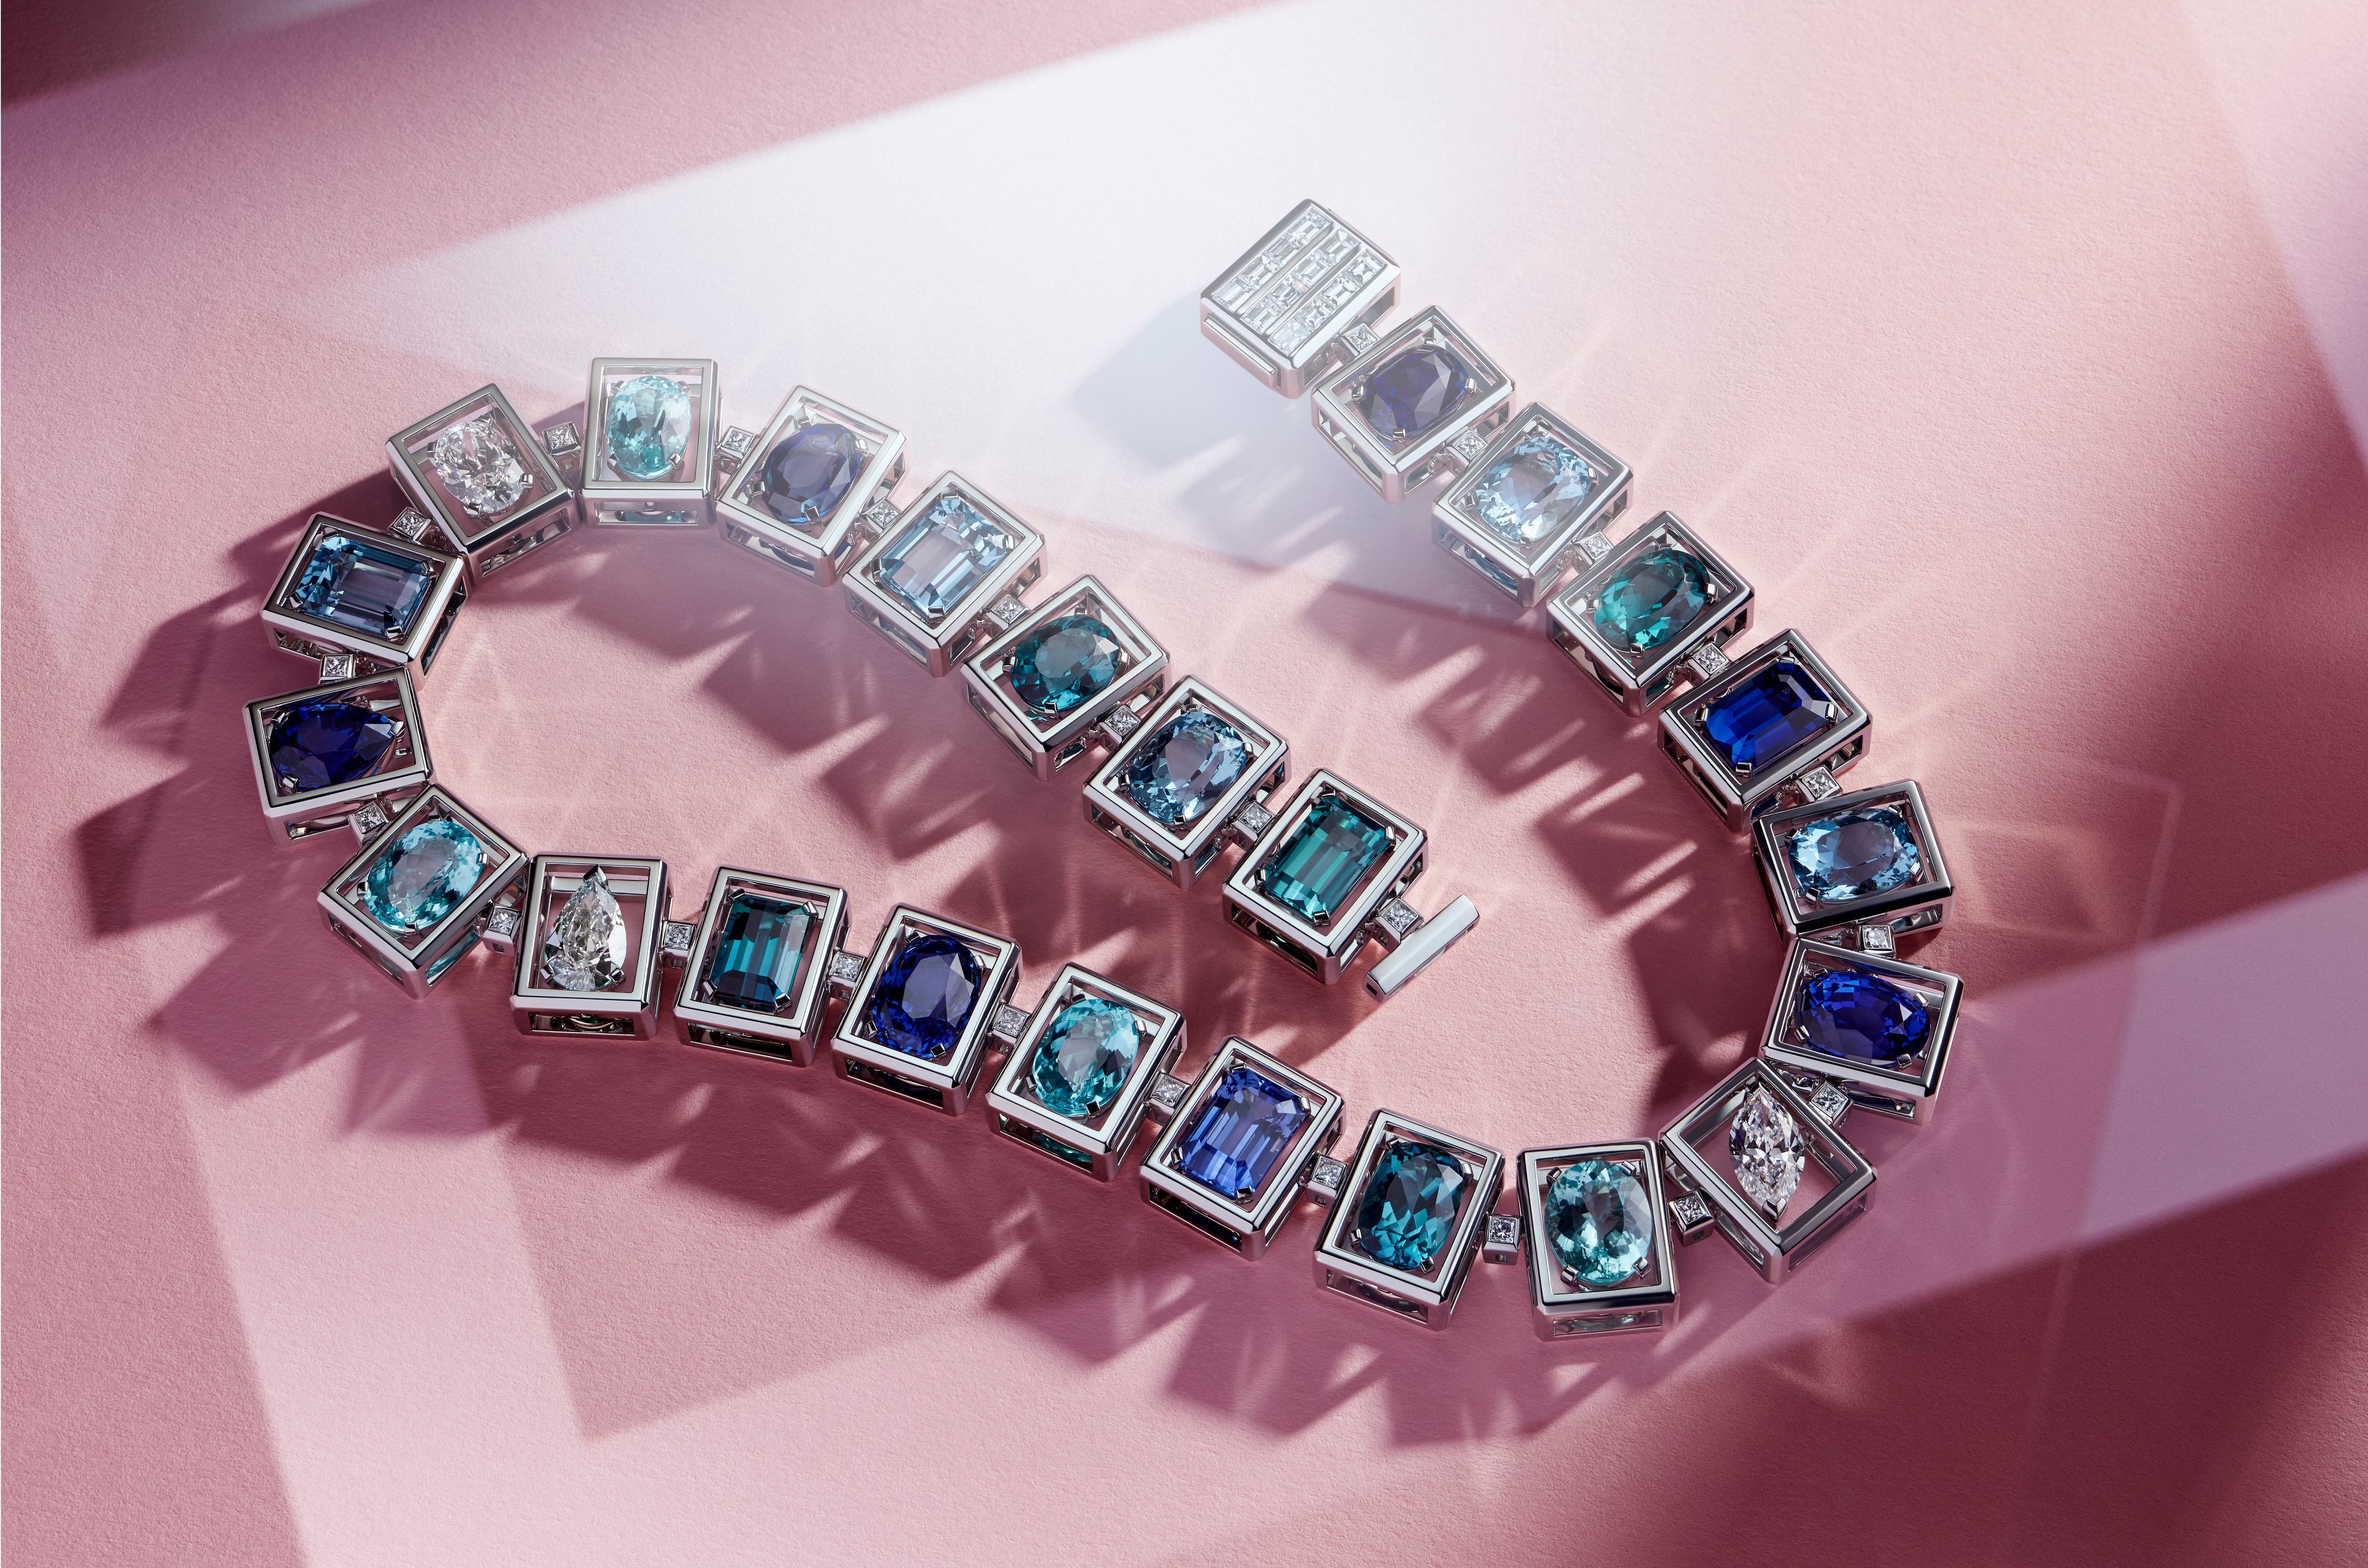 tiffany & co., blue book collection, blue book collection 2019, high jewellery, jewel box, nature